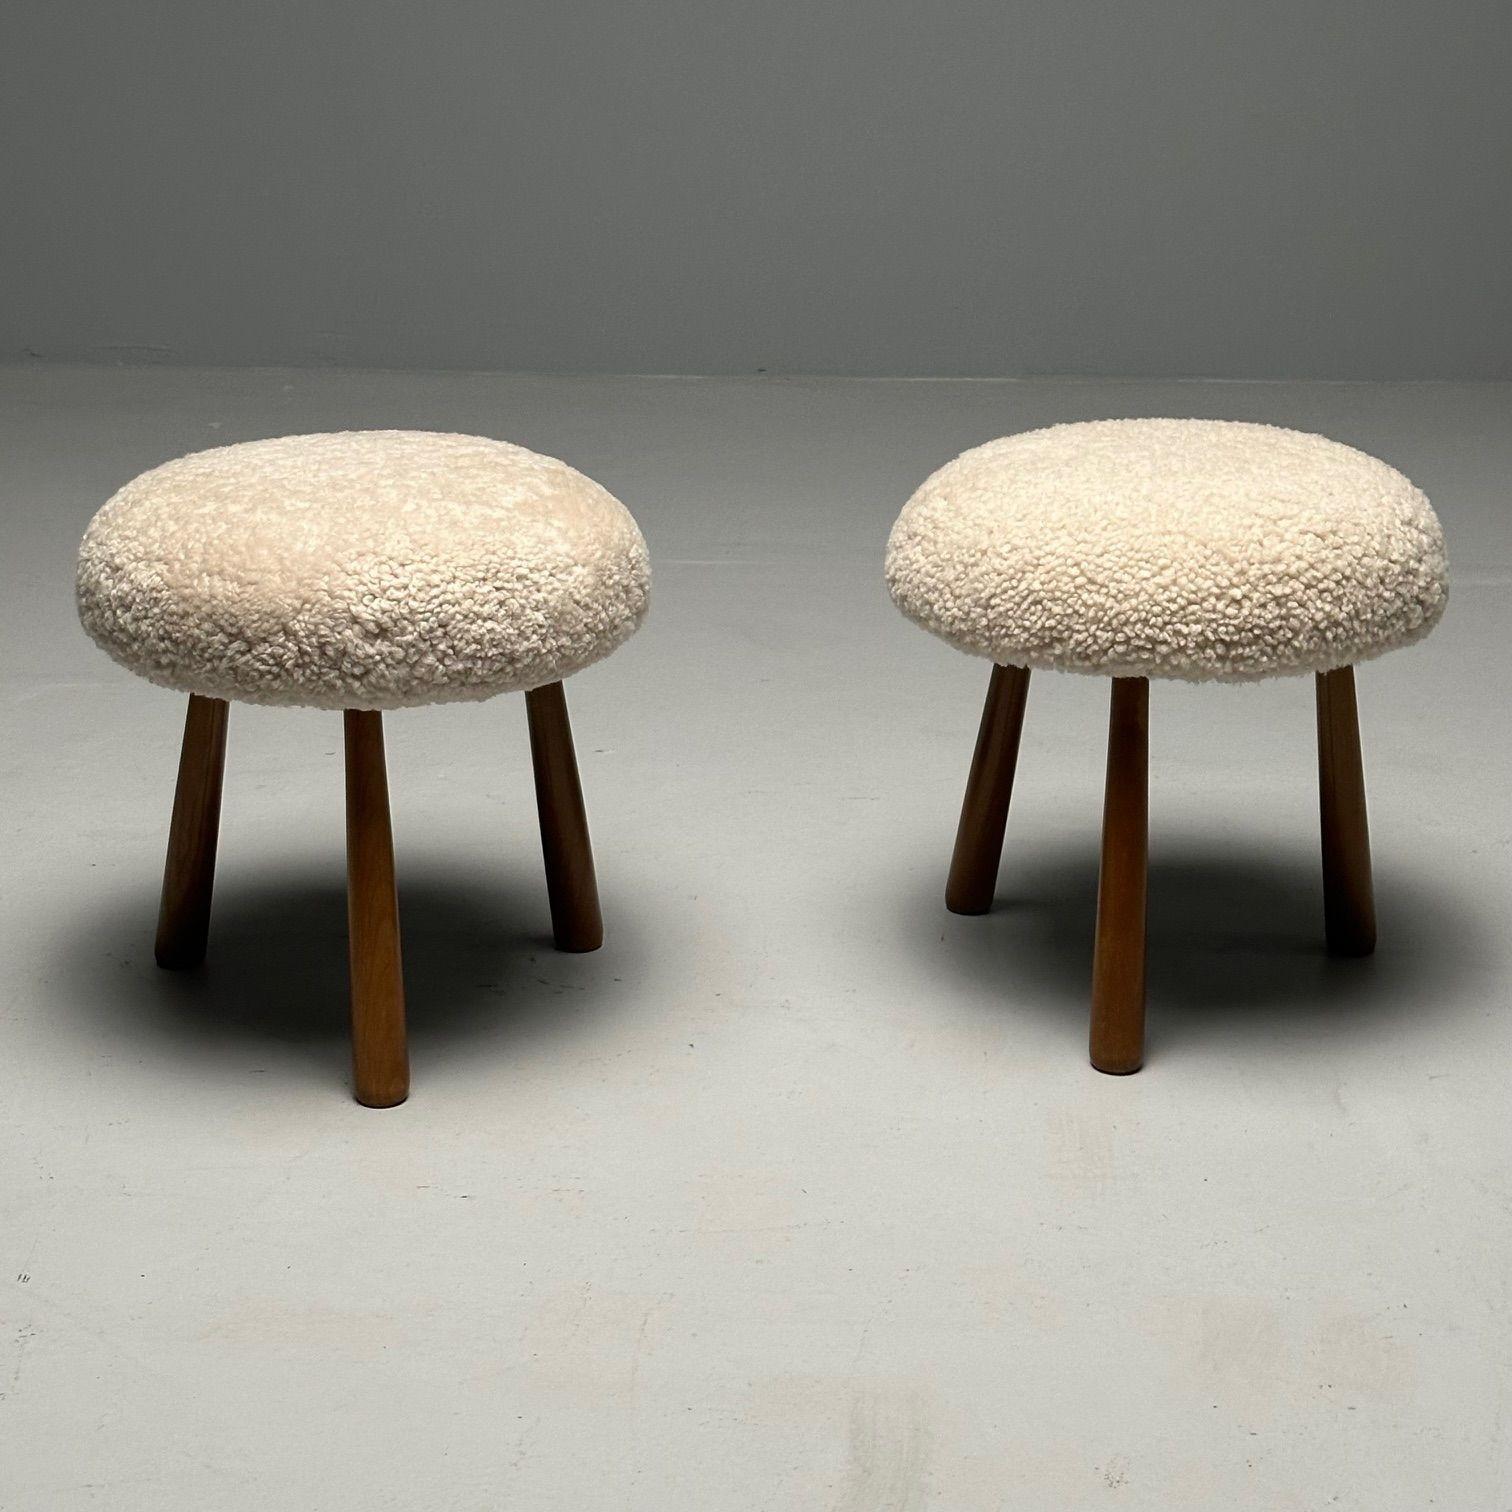 Pair Contemporary Sheepskin Stools / Ottomans, Swedish Modern Style, Shearling


Contemporary organic form tri-pod footstools or ottomans. New comfortable foam cushioning and 17 mm high quality Australian curly sheepskin. Overall form and design